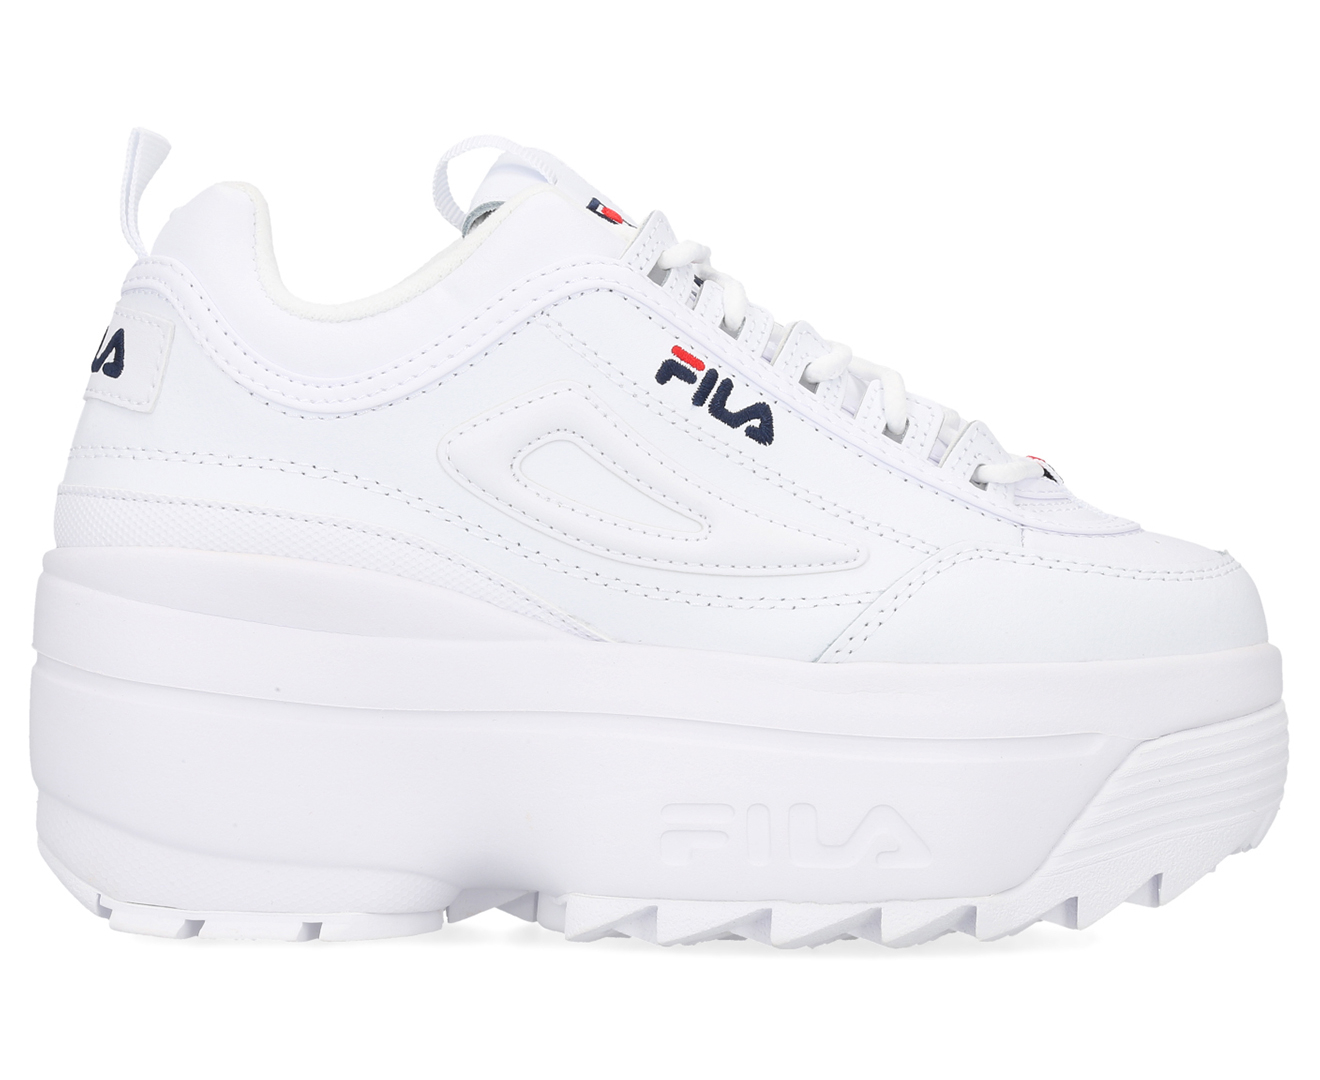 Fila Women's Disruptor 2 Wedge Sneakers - White/Navy/Red | Catch.com.au